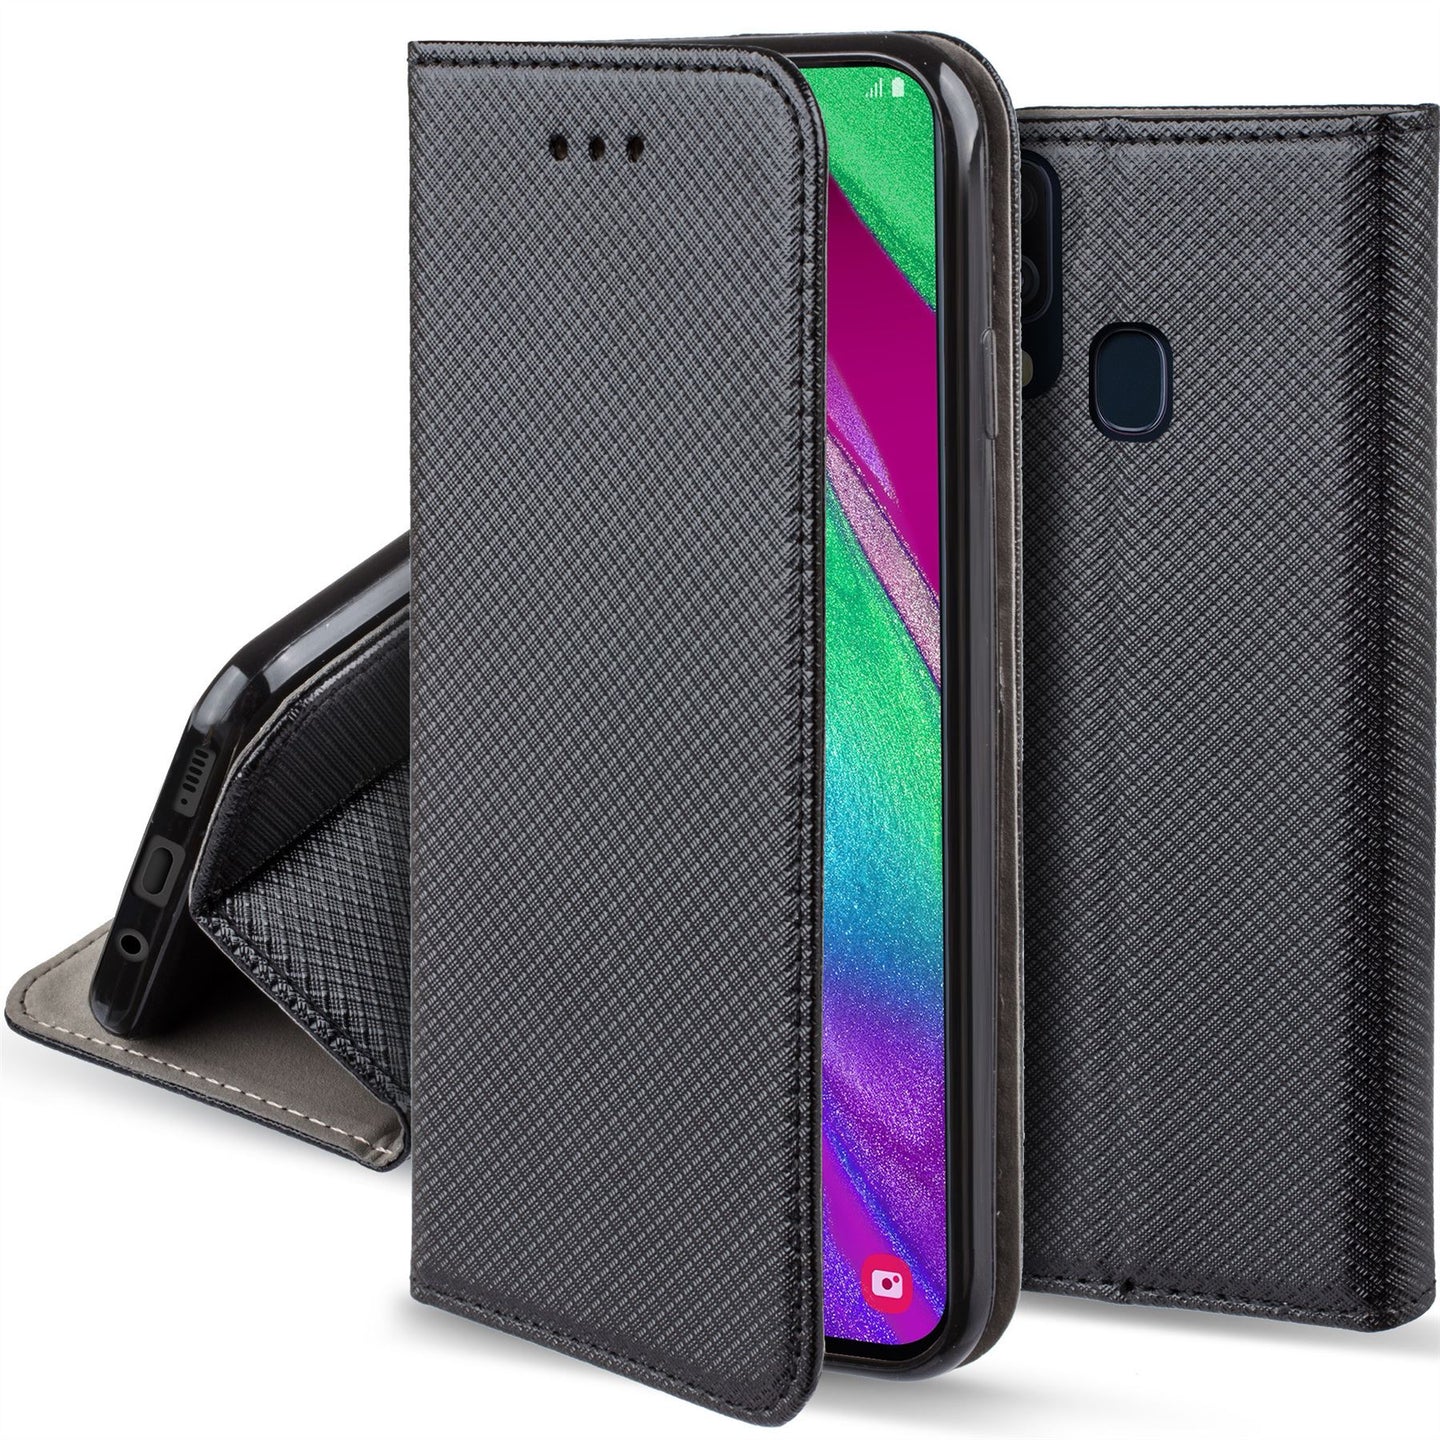 Moozy Case Flip Cover for Samsung A40, Black - Smart Magnetic Flip Case with Card Holder and Stand